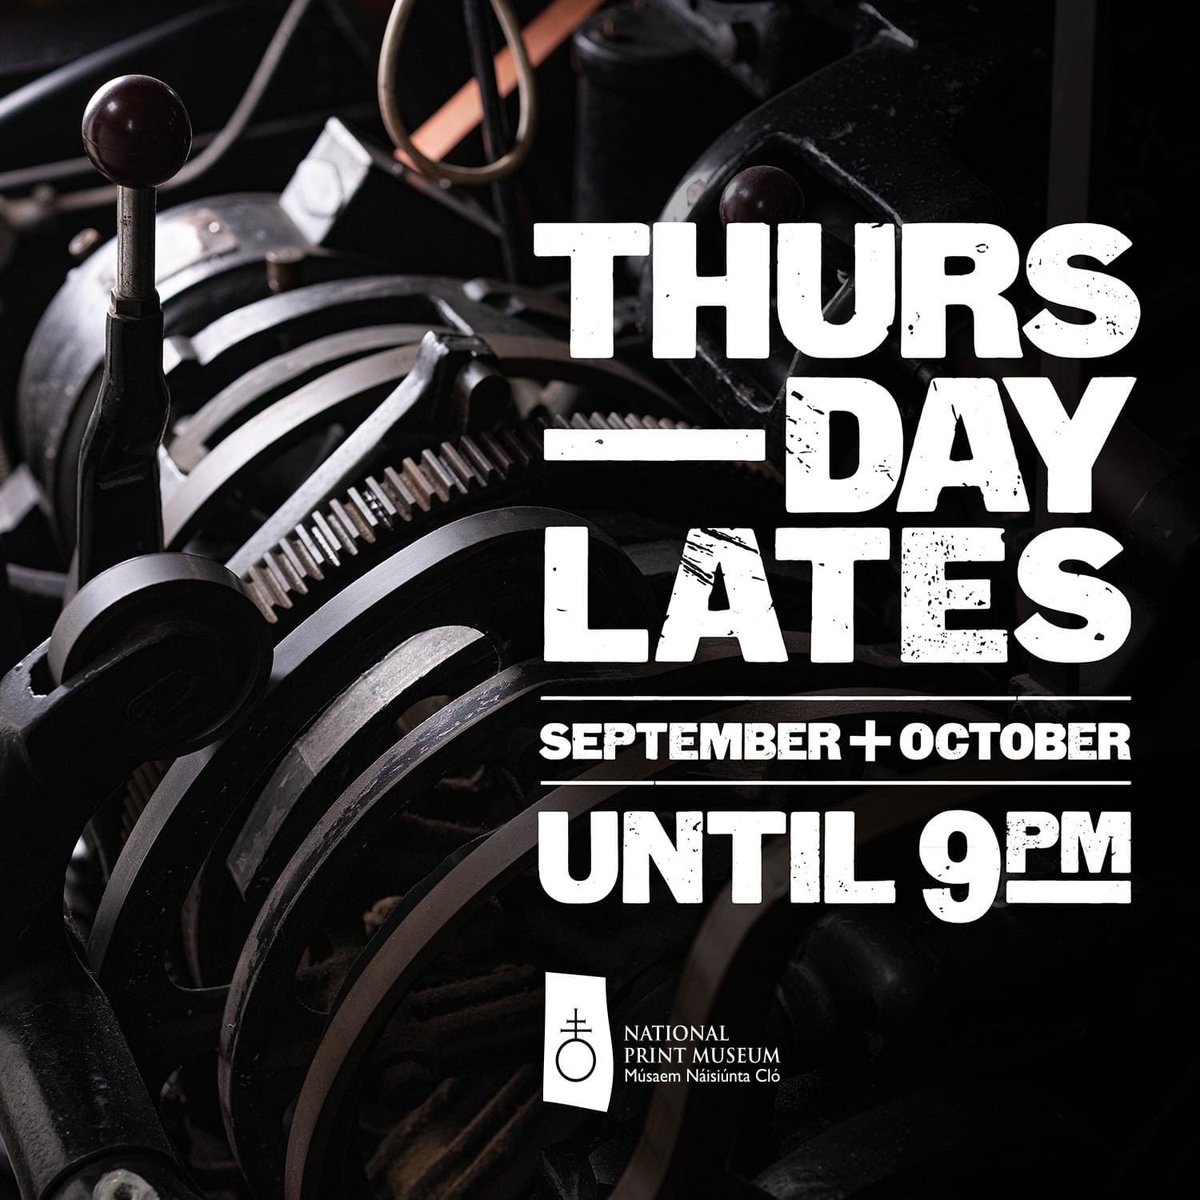 We’re open until 9pm on Thursdays for September and October! This is made possible through the Night-Time Economy Unit @DeptCultureIRL #NTE23 #dublin #ThursdayLates